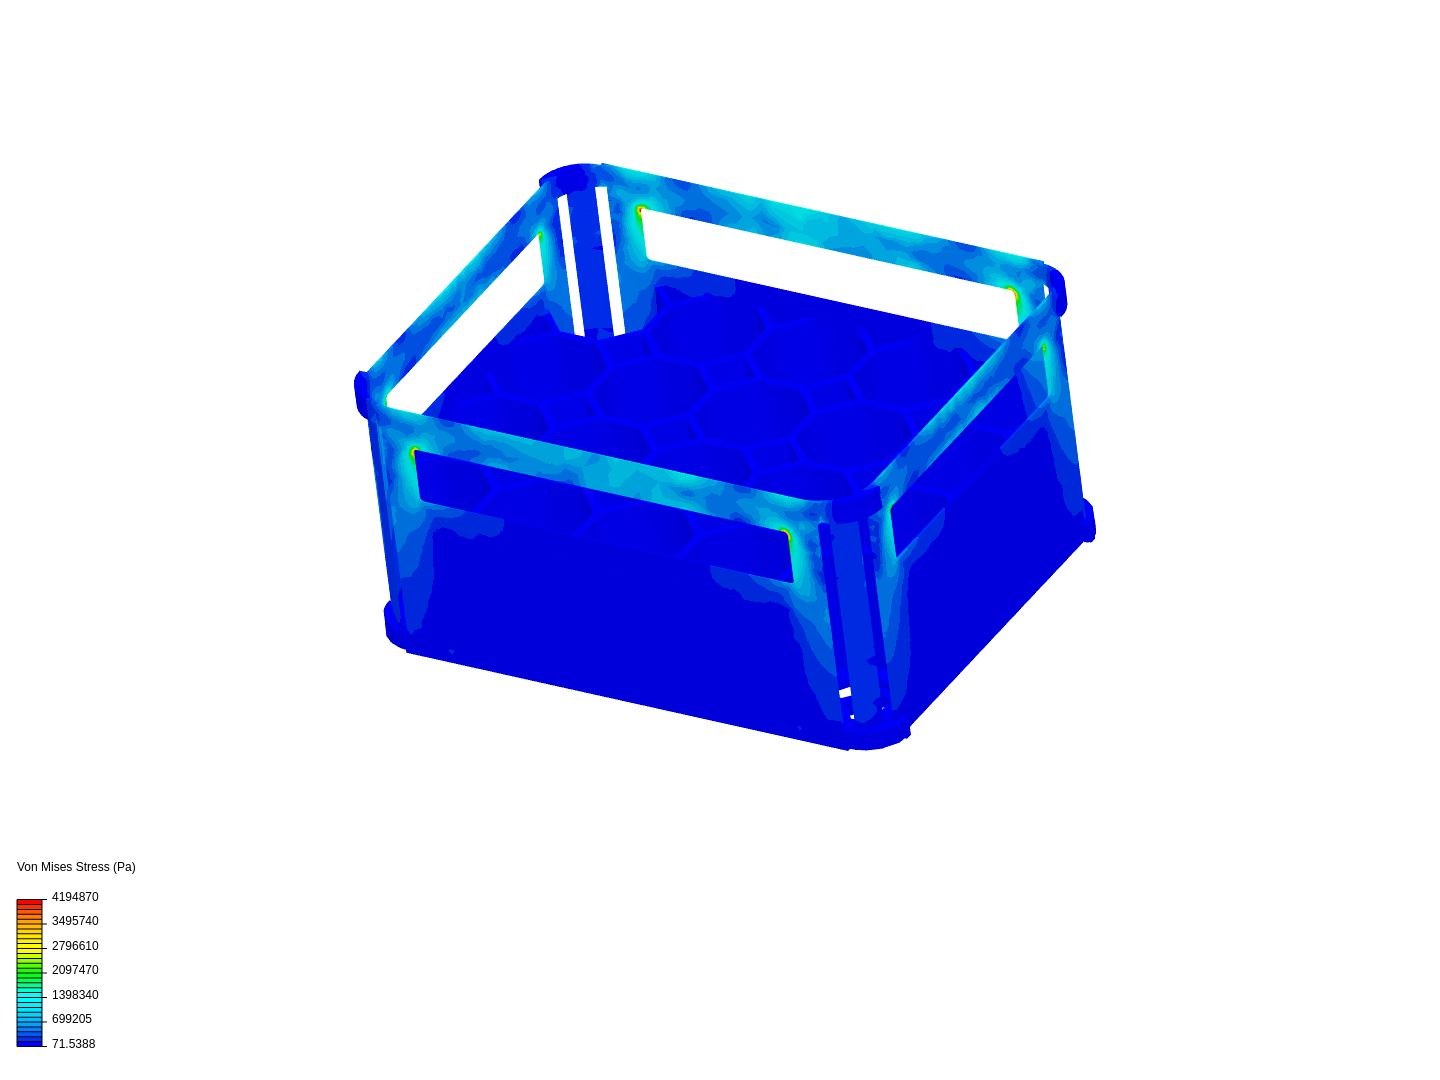 fruit crate image